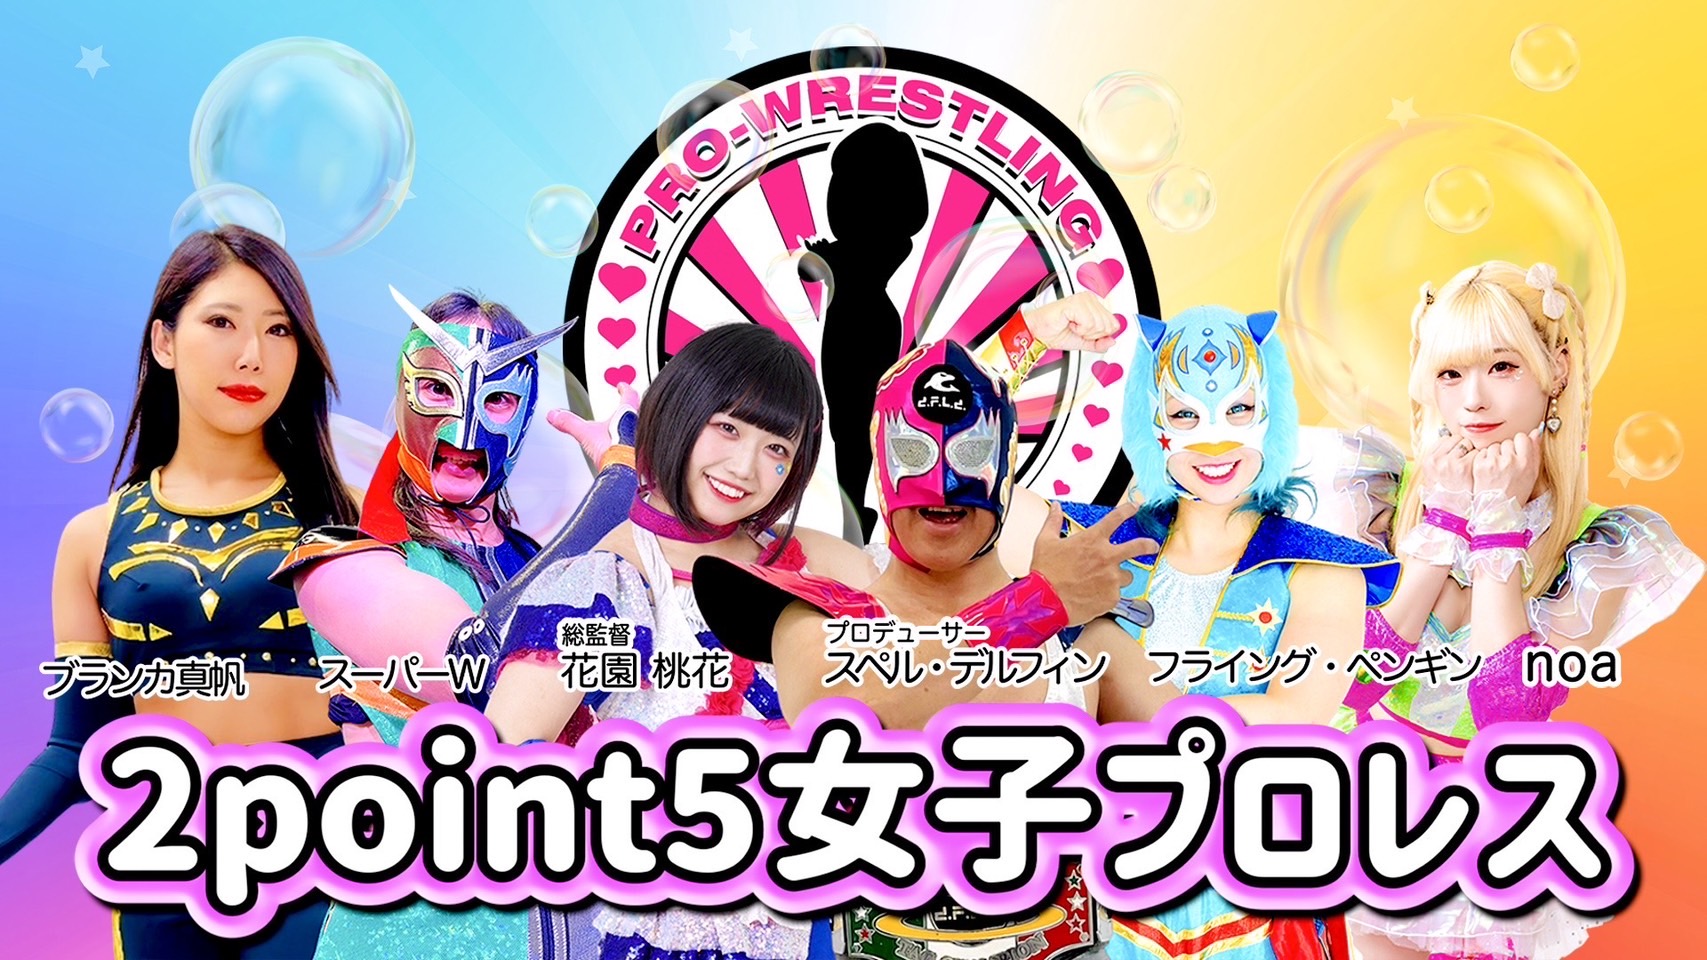 2point5女子プロレス